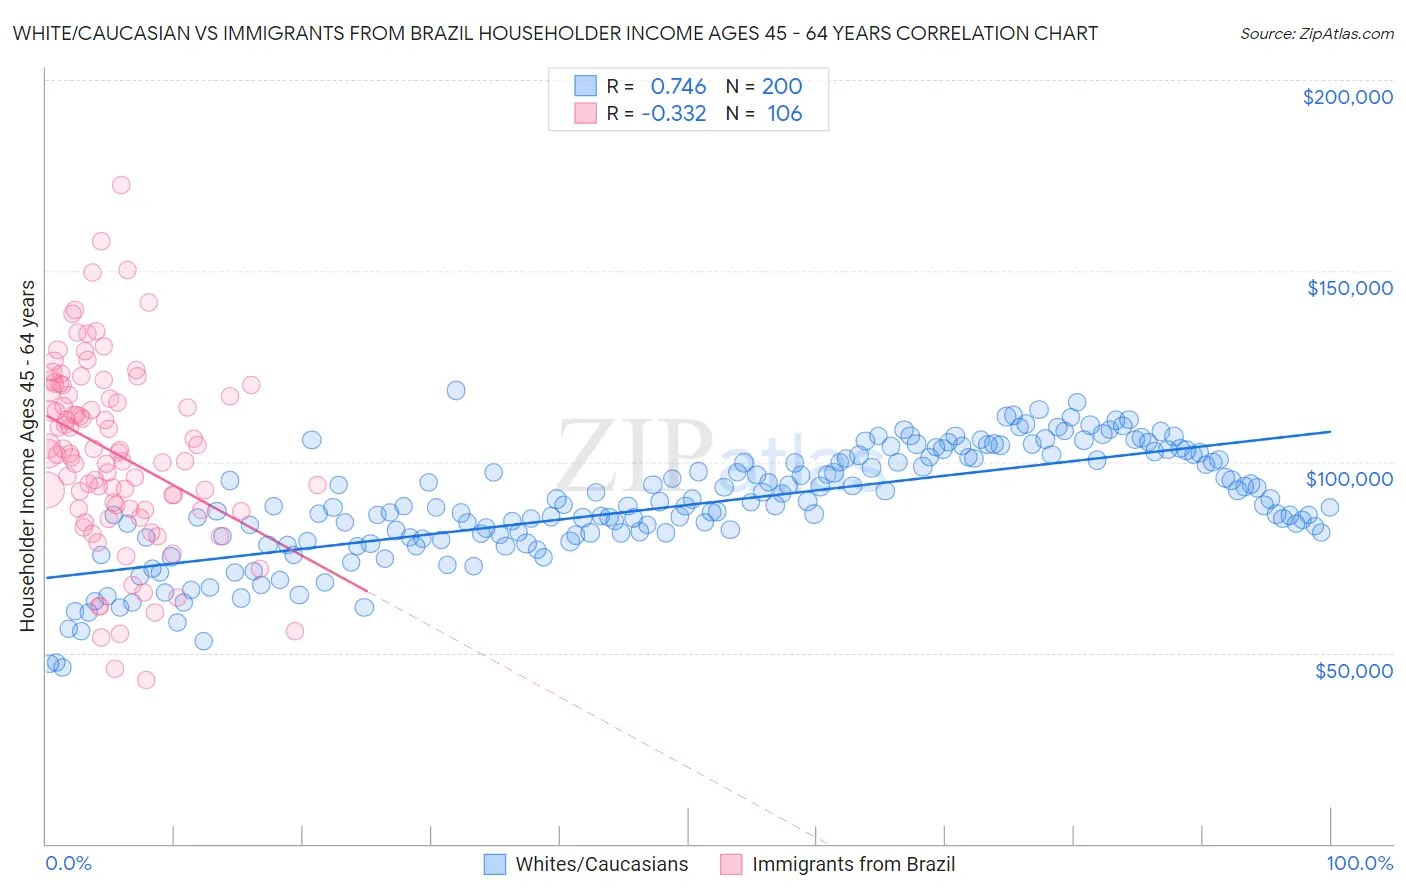 White/Caucasian vs Immigrants from Brazil Householder Income Ages 45 - 64 years